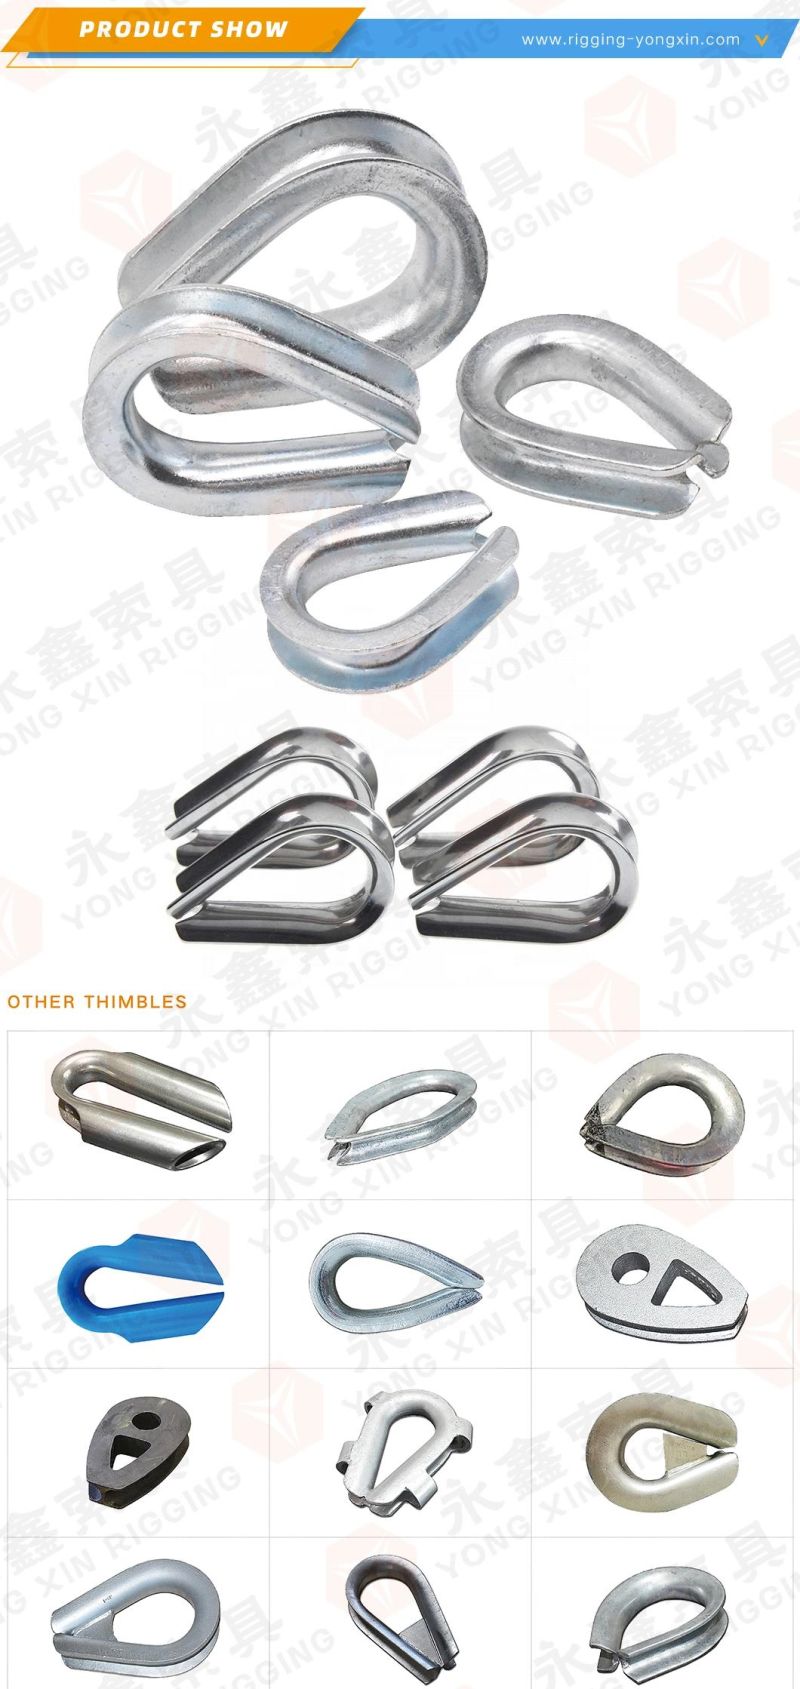 High Quality 1/2" 3/4" 7/8" G414 Hot DIP Galvanized Rigging Hardware Heavy Duty Us Type Cable Thimble